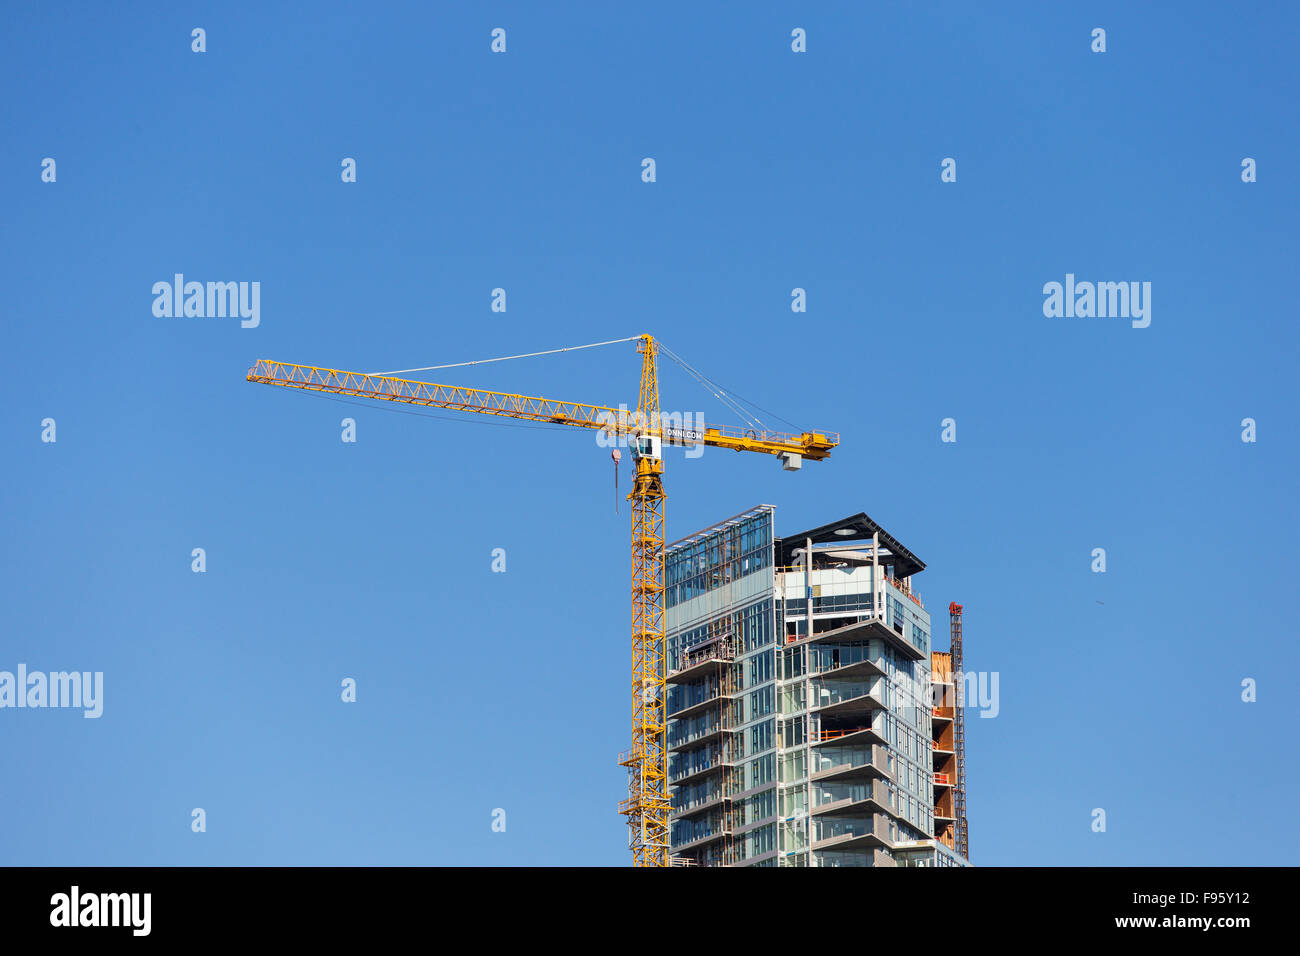 Crane, viewed from Granville Island, Vancouver, British Columbia. Stock Photo